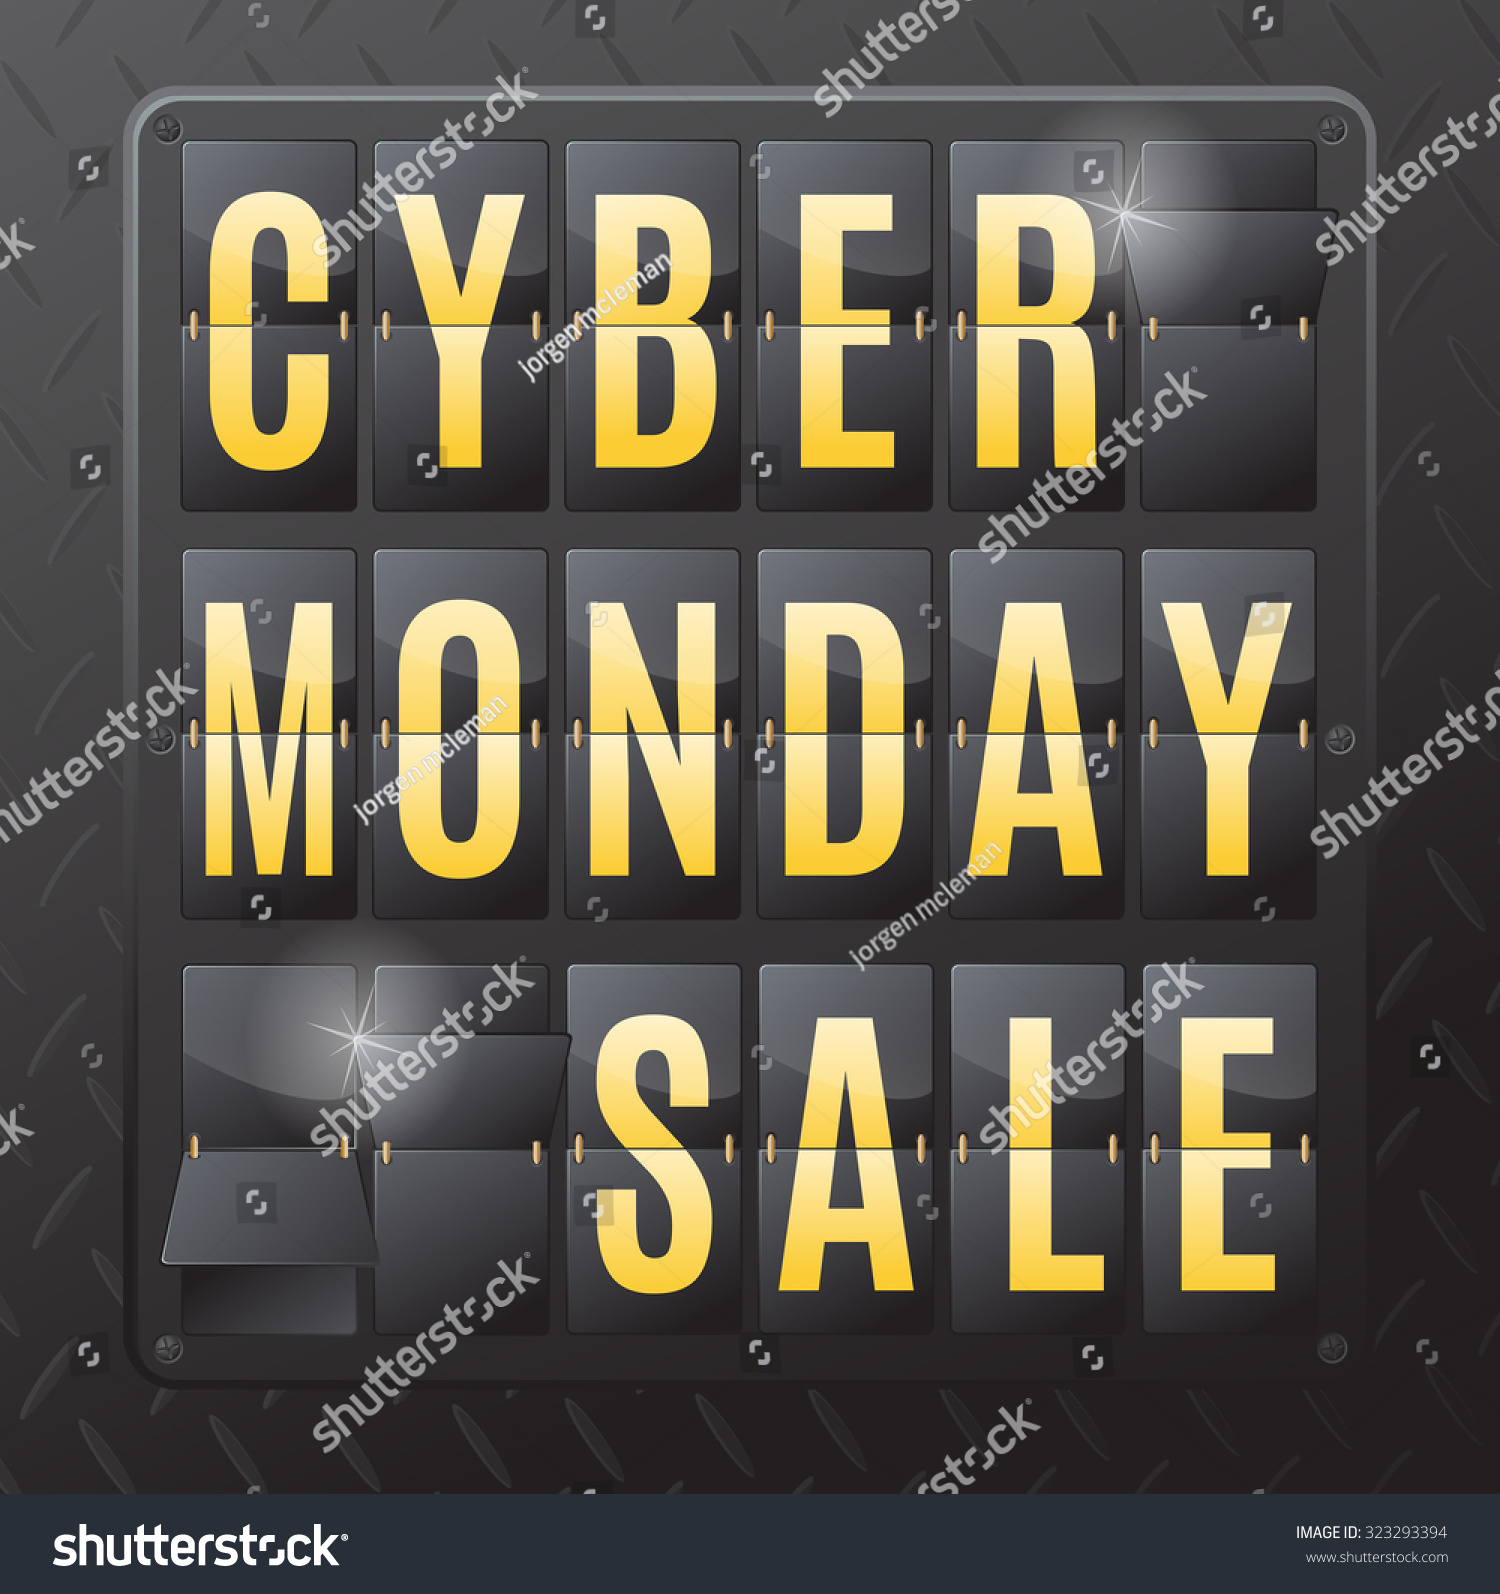 Cyber Monday Day Following Thanksgiving Day Stock Illustration 323293394